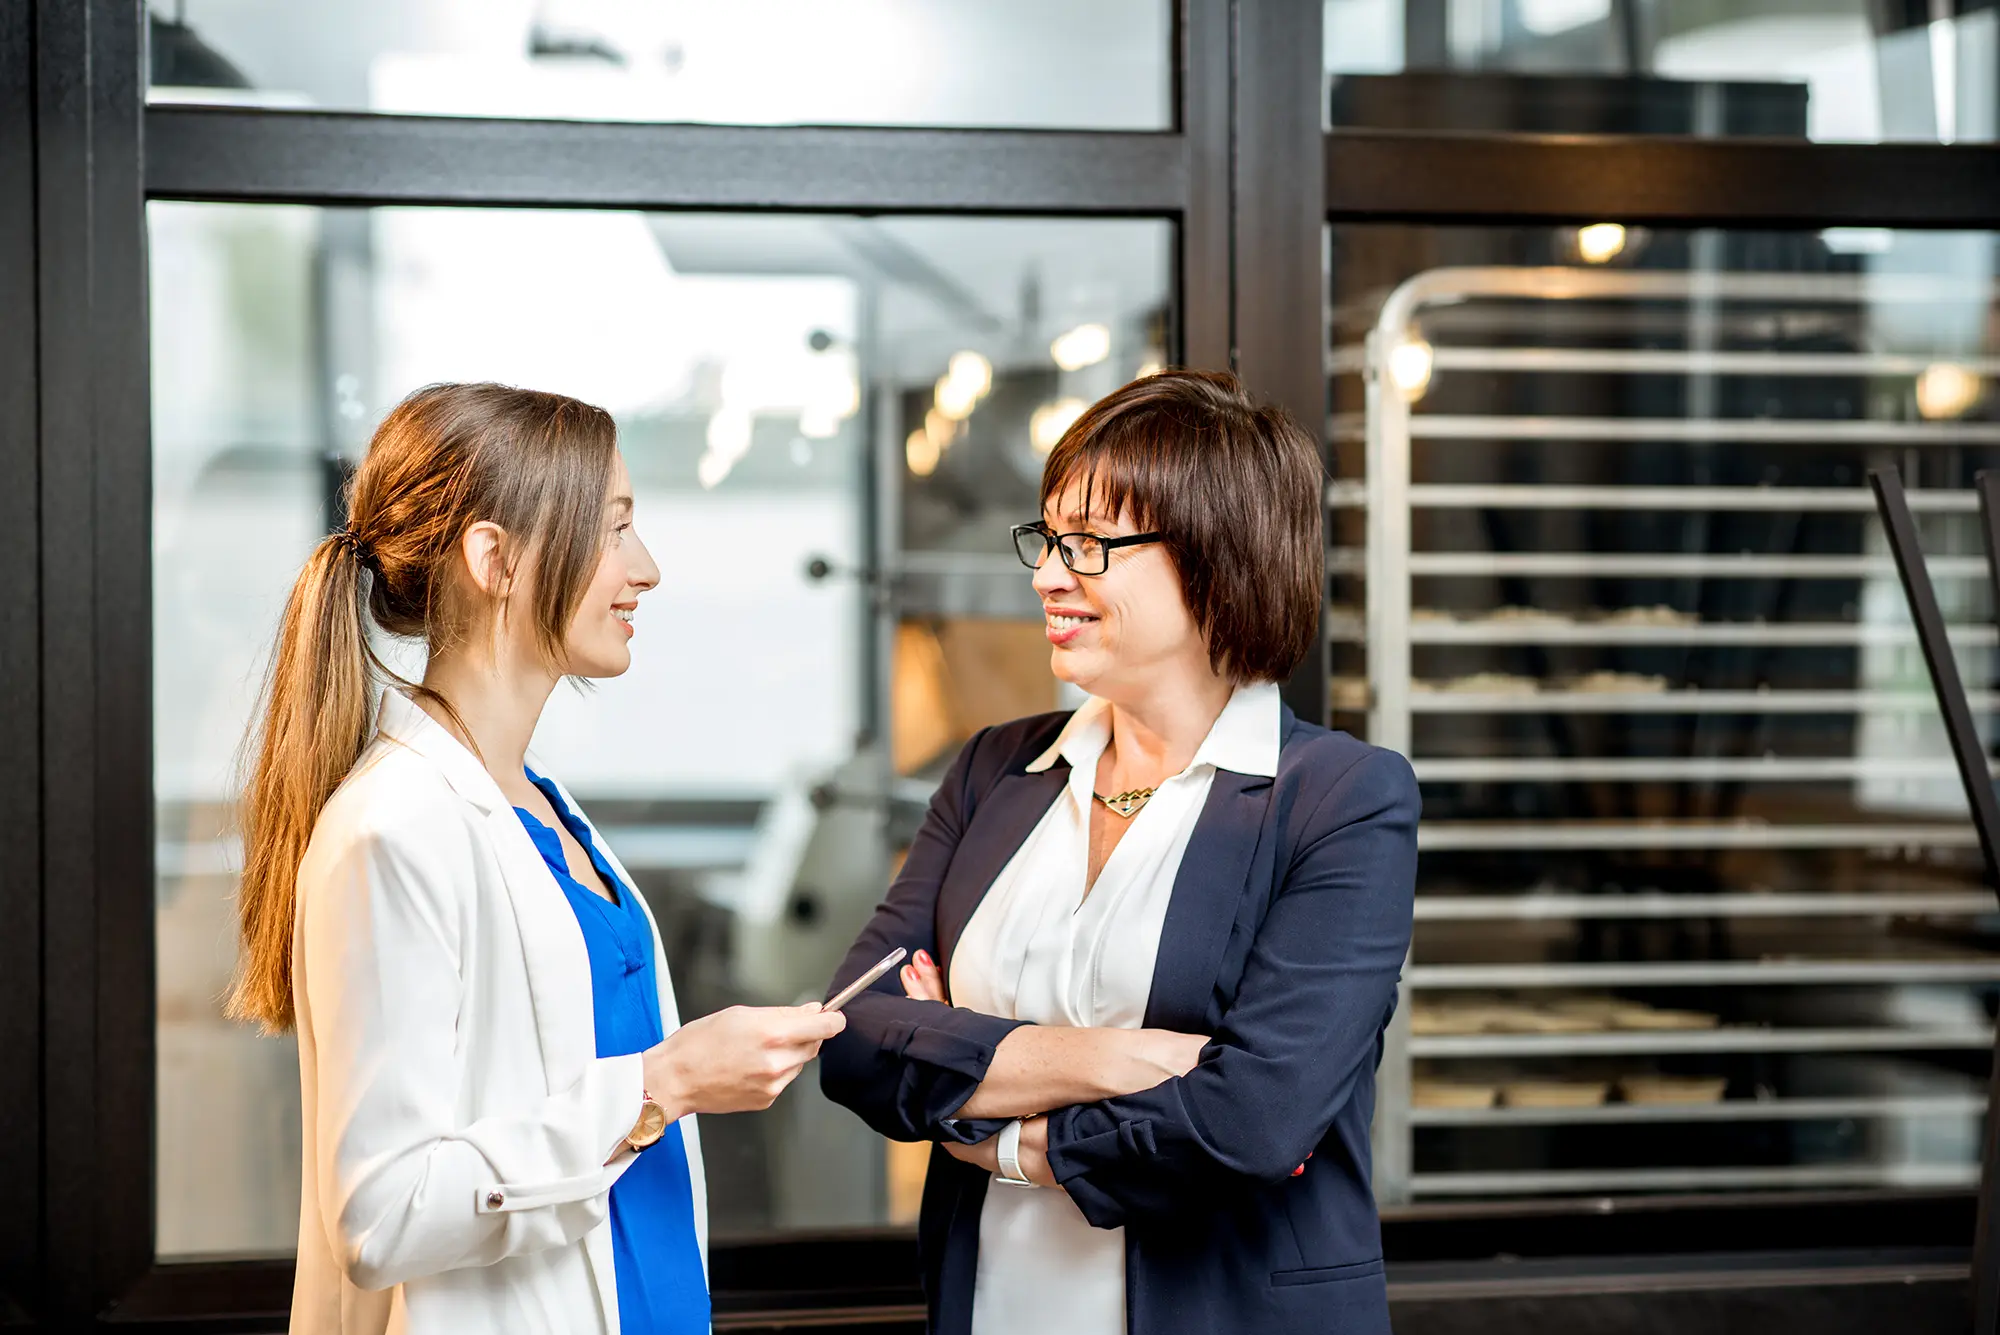 Adobe Stock 203651530 Business women talking in the office of the bakery store copy